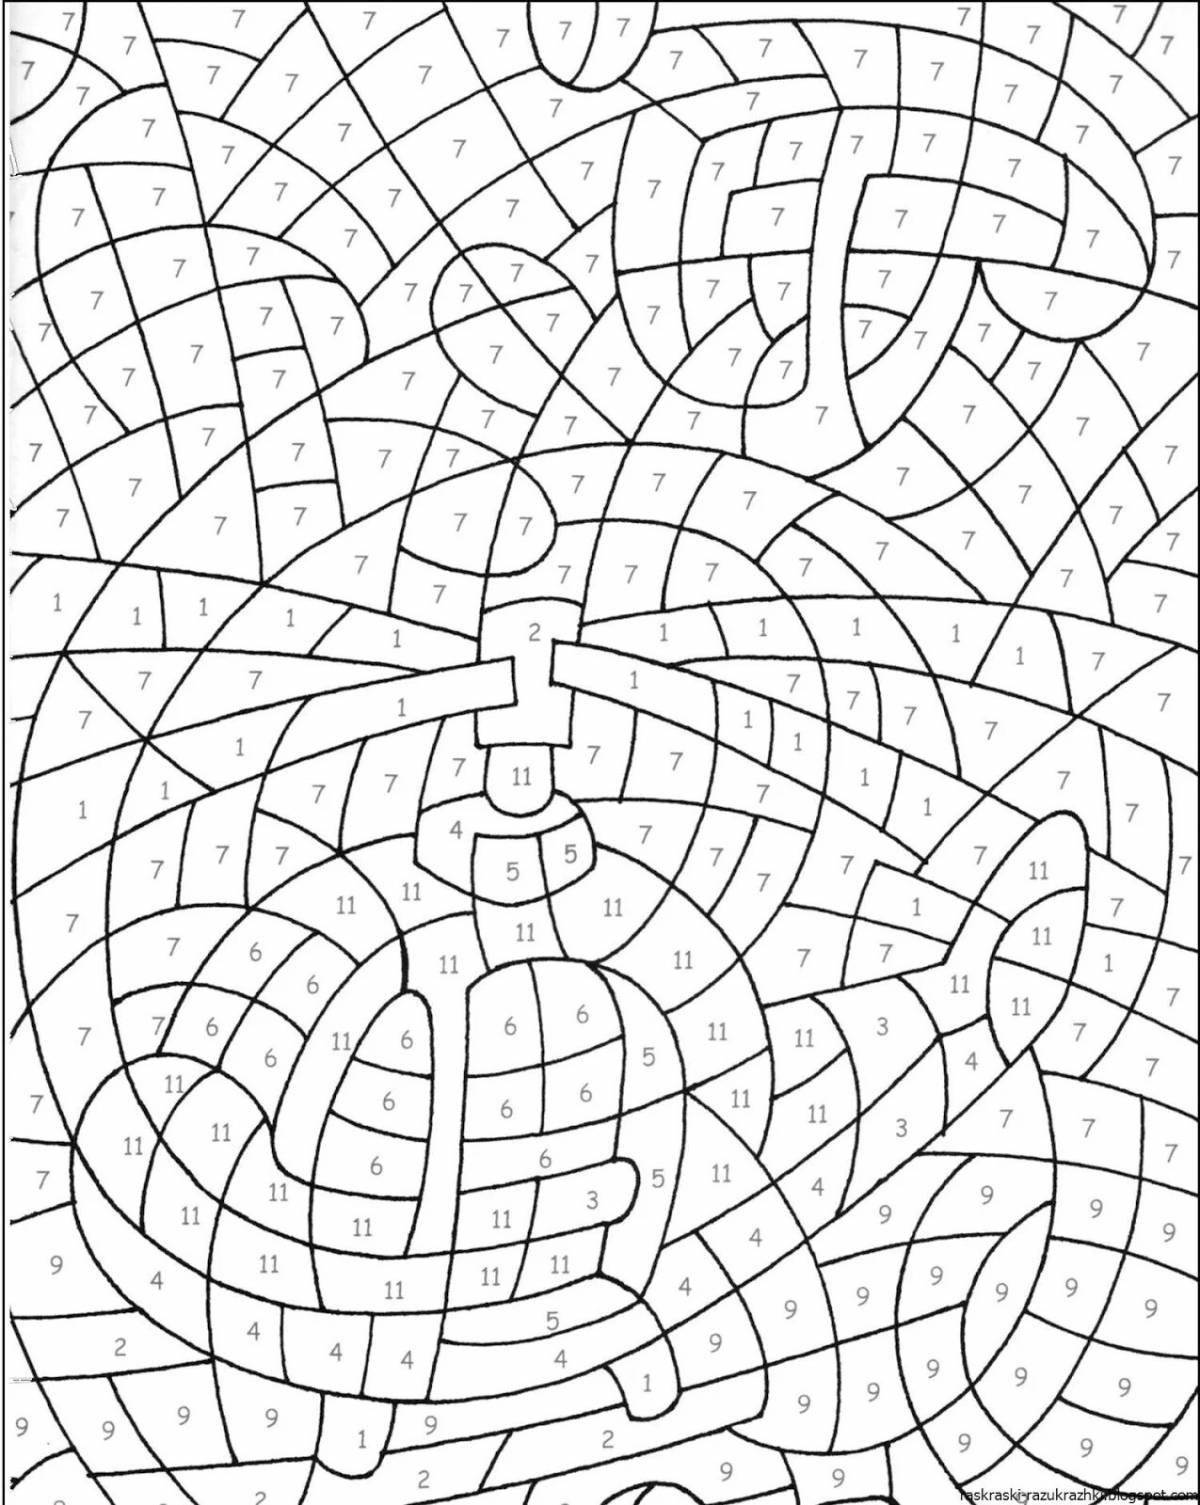 Playful coloring by number squares